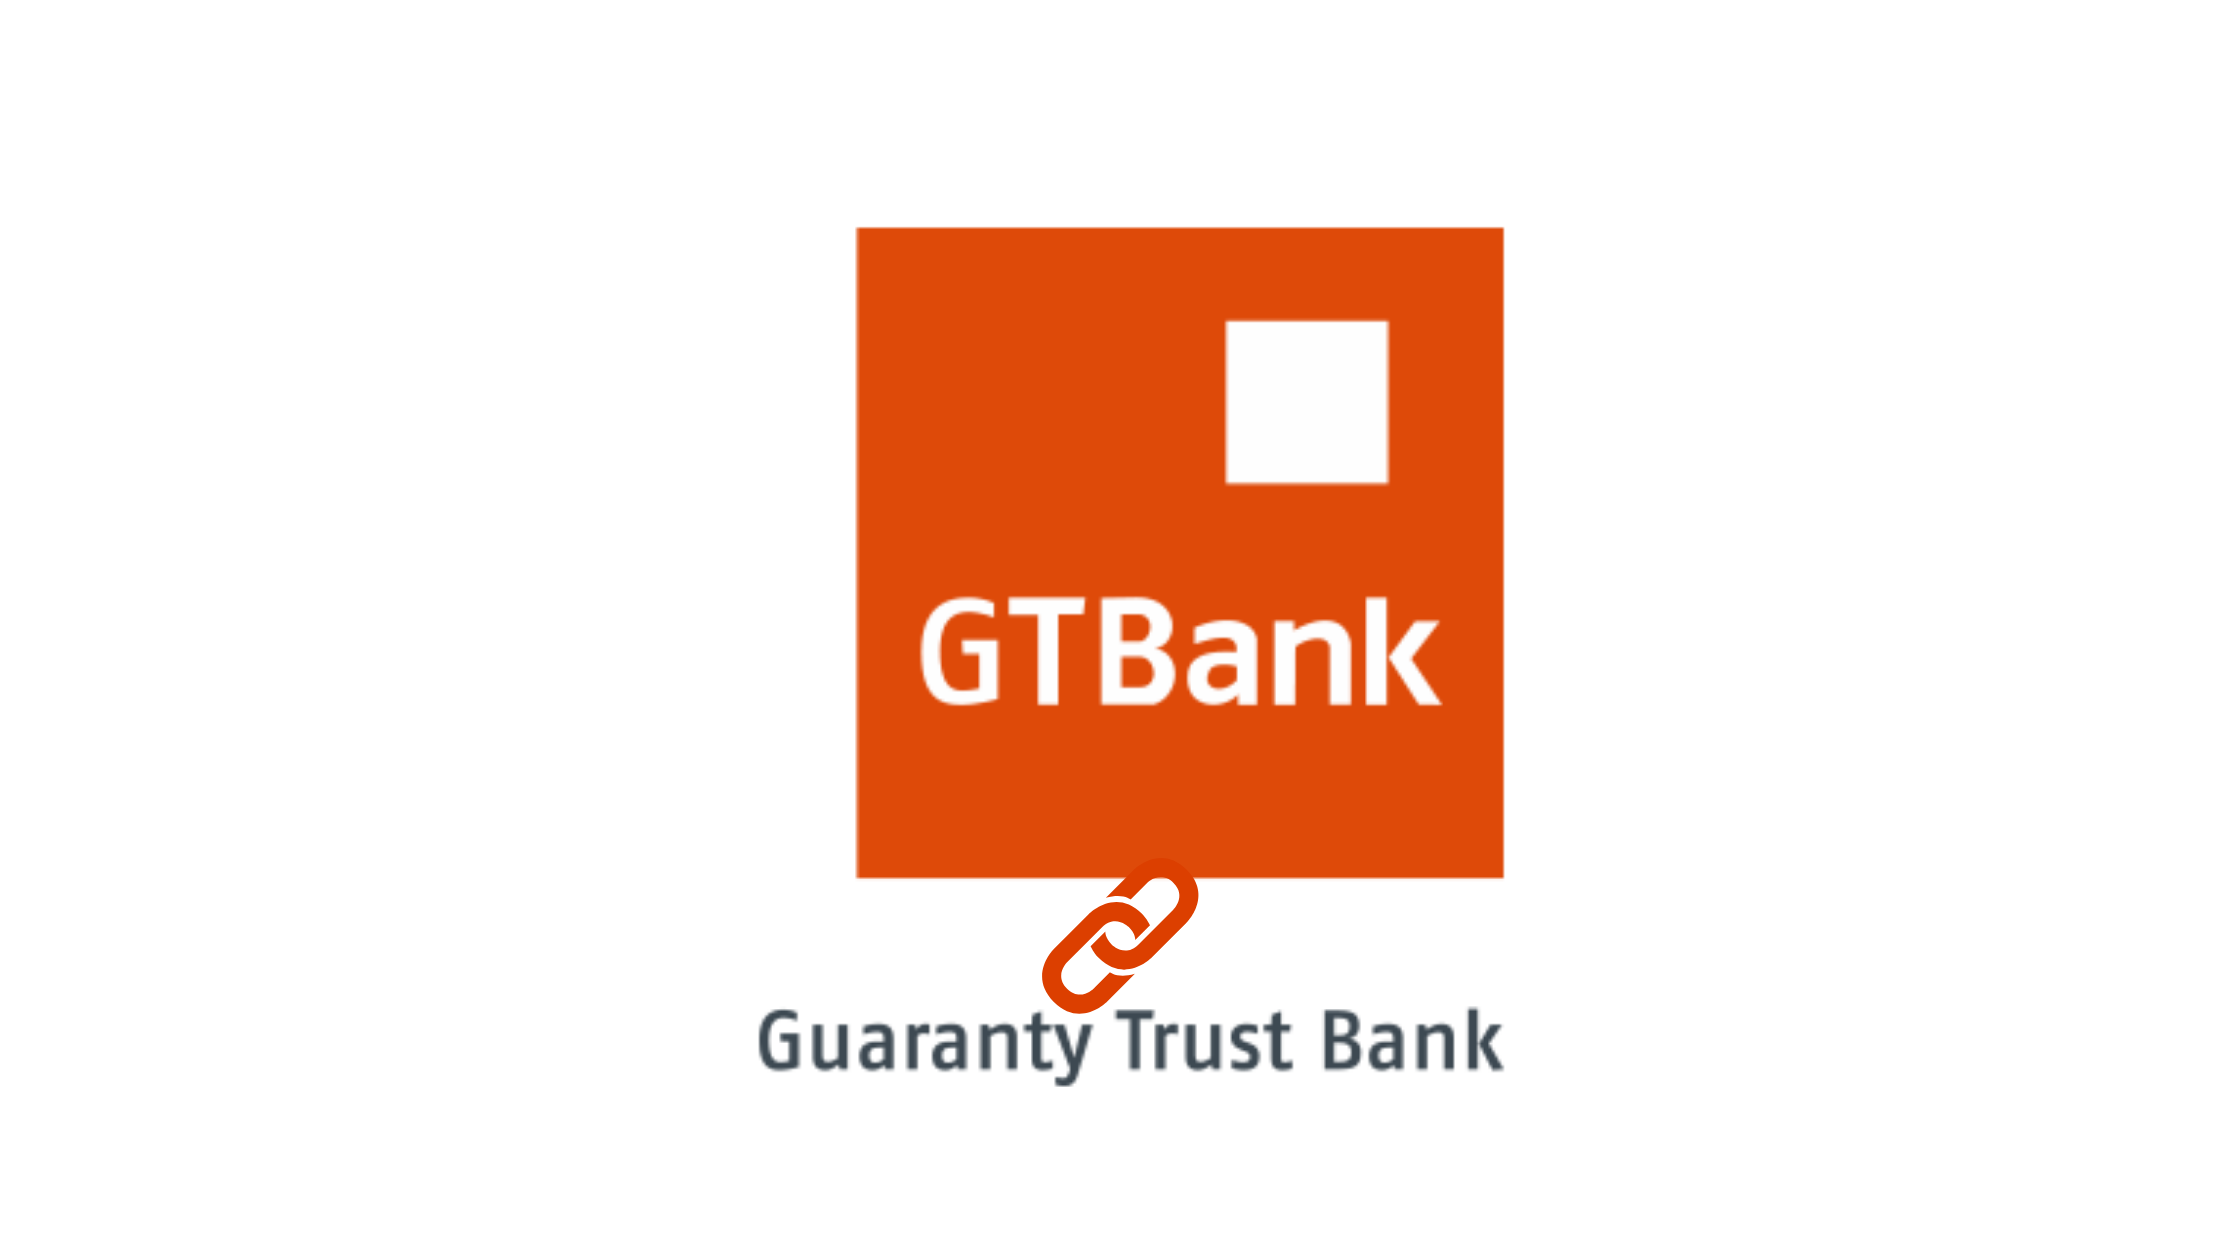 How to link BVN to GTbank account